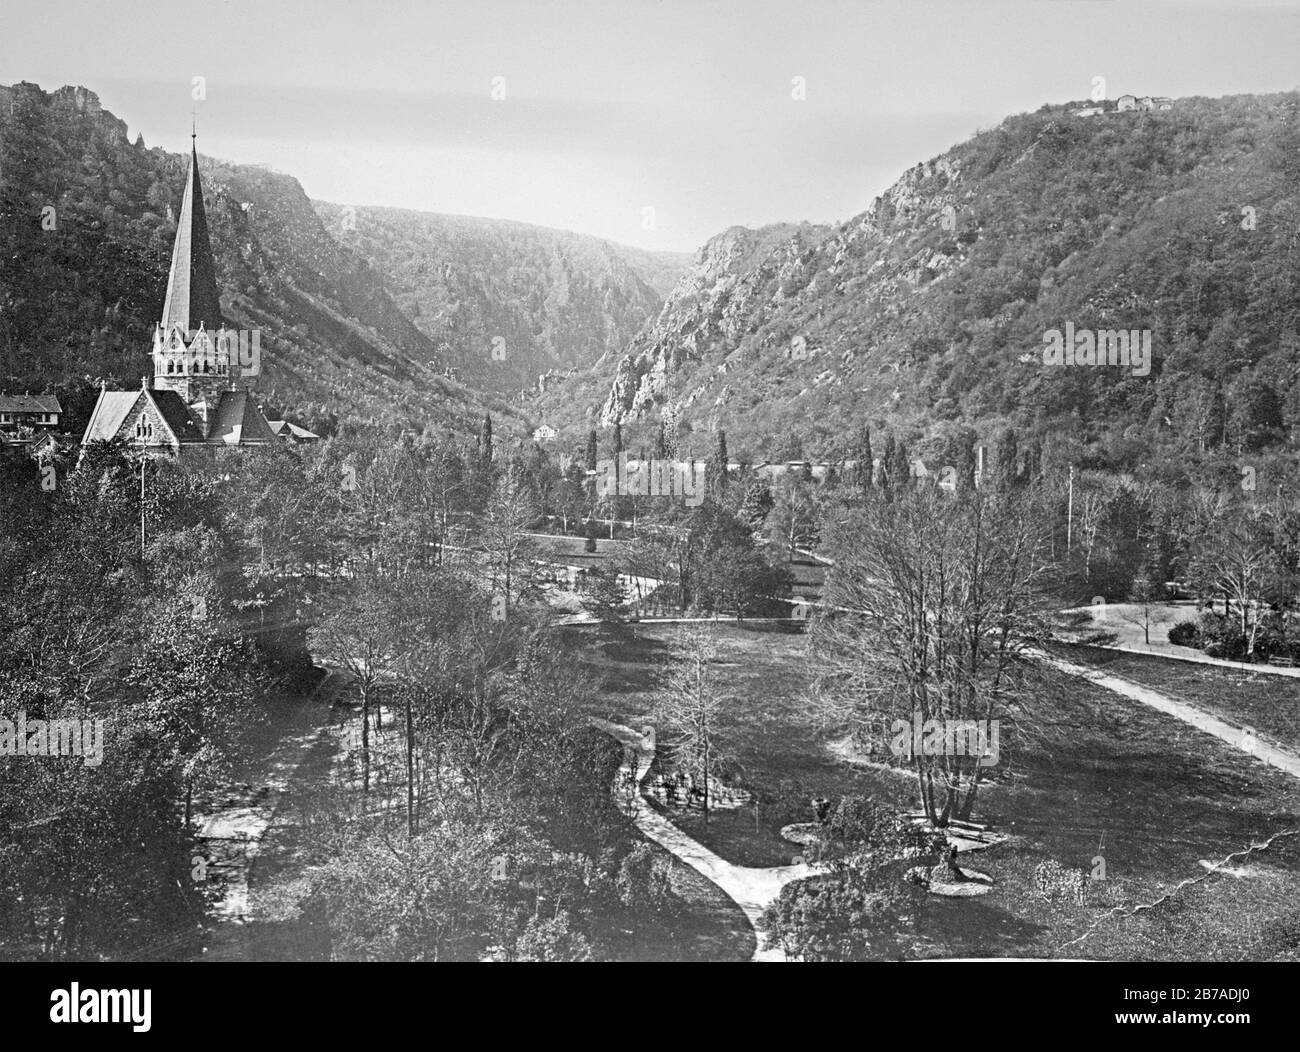 Bodetal valley Black and White Stock Photos & Images - Alamy